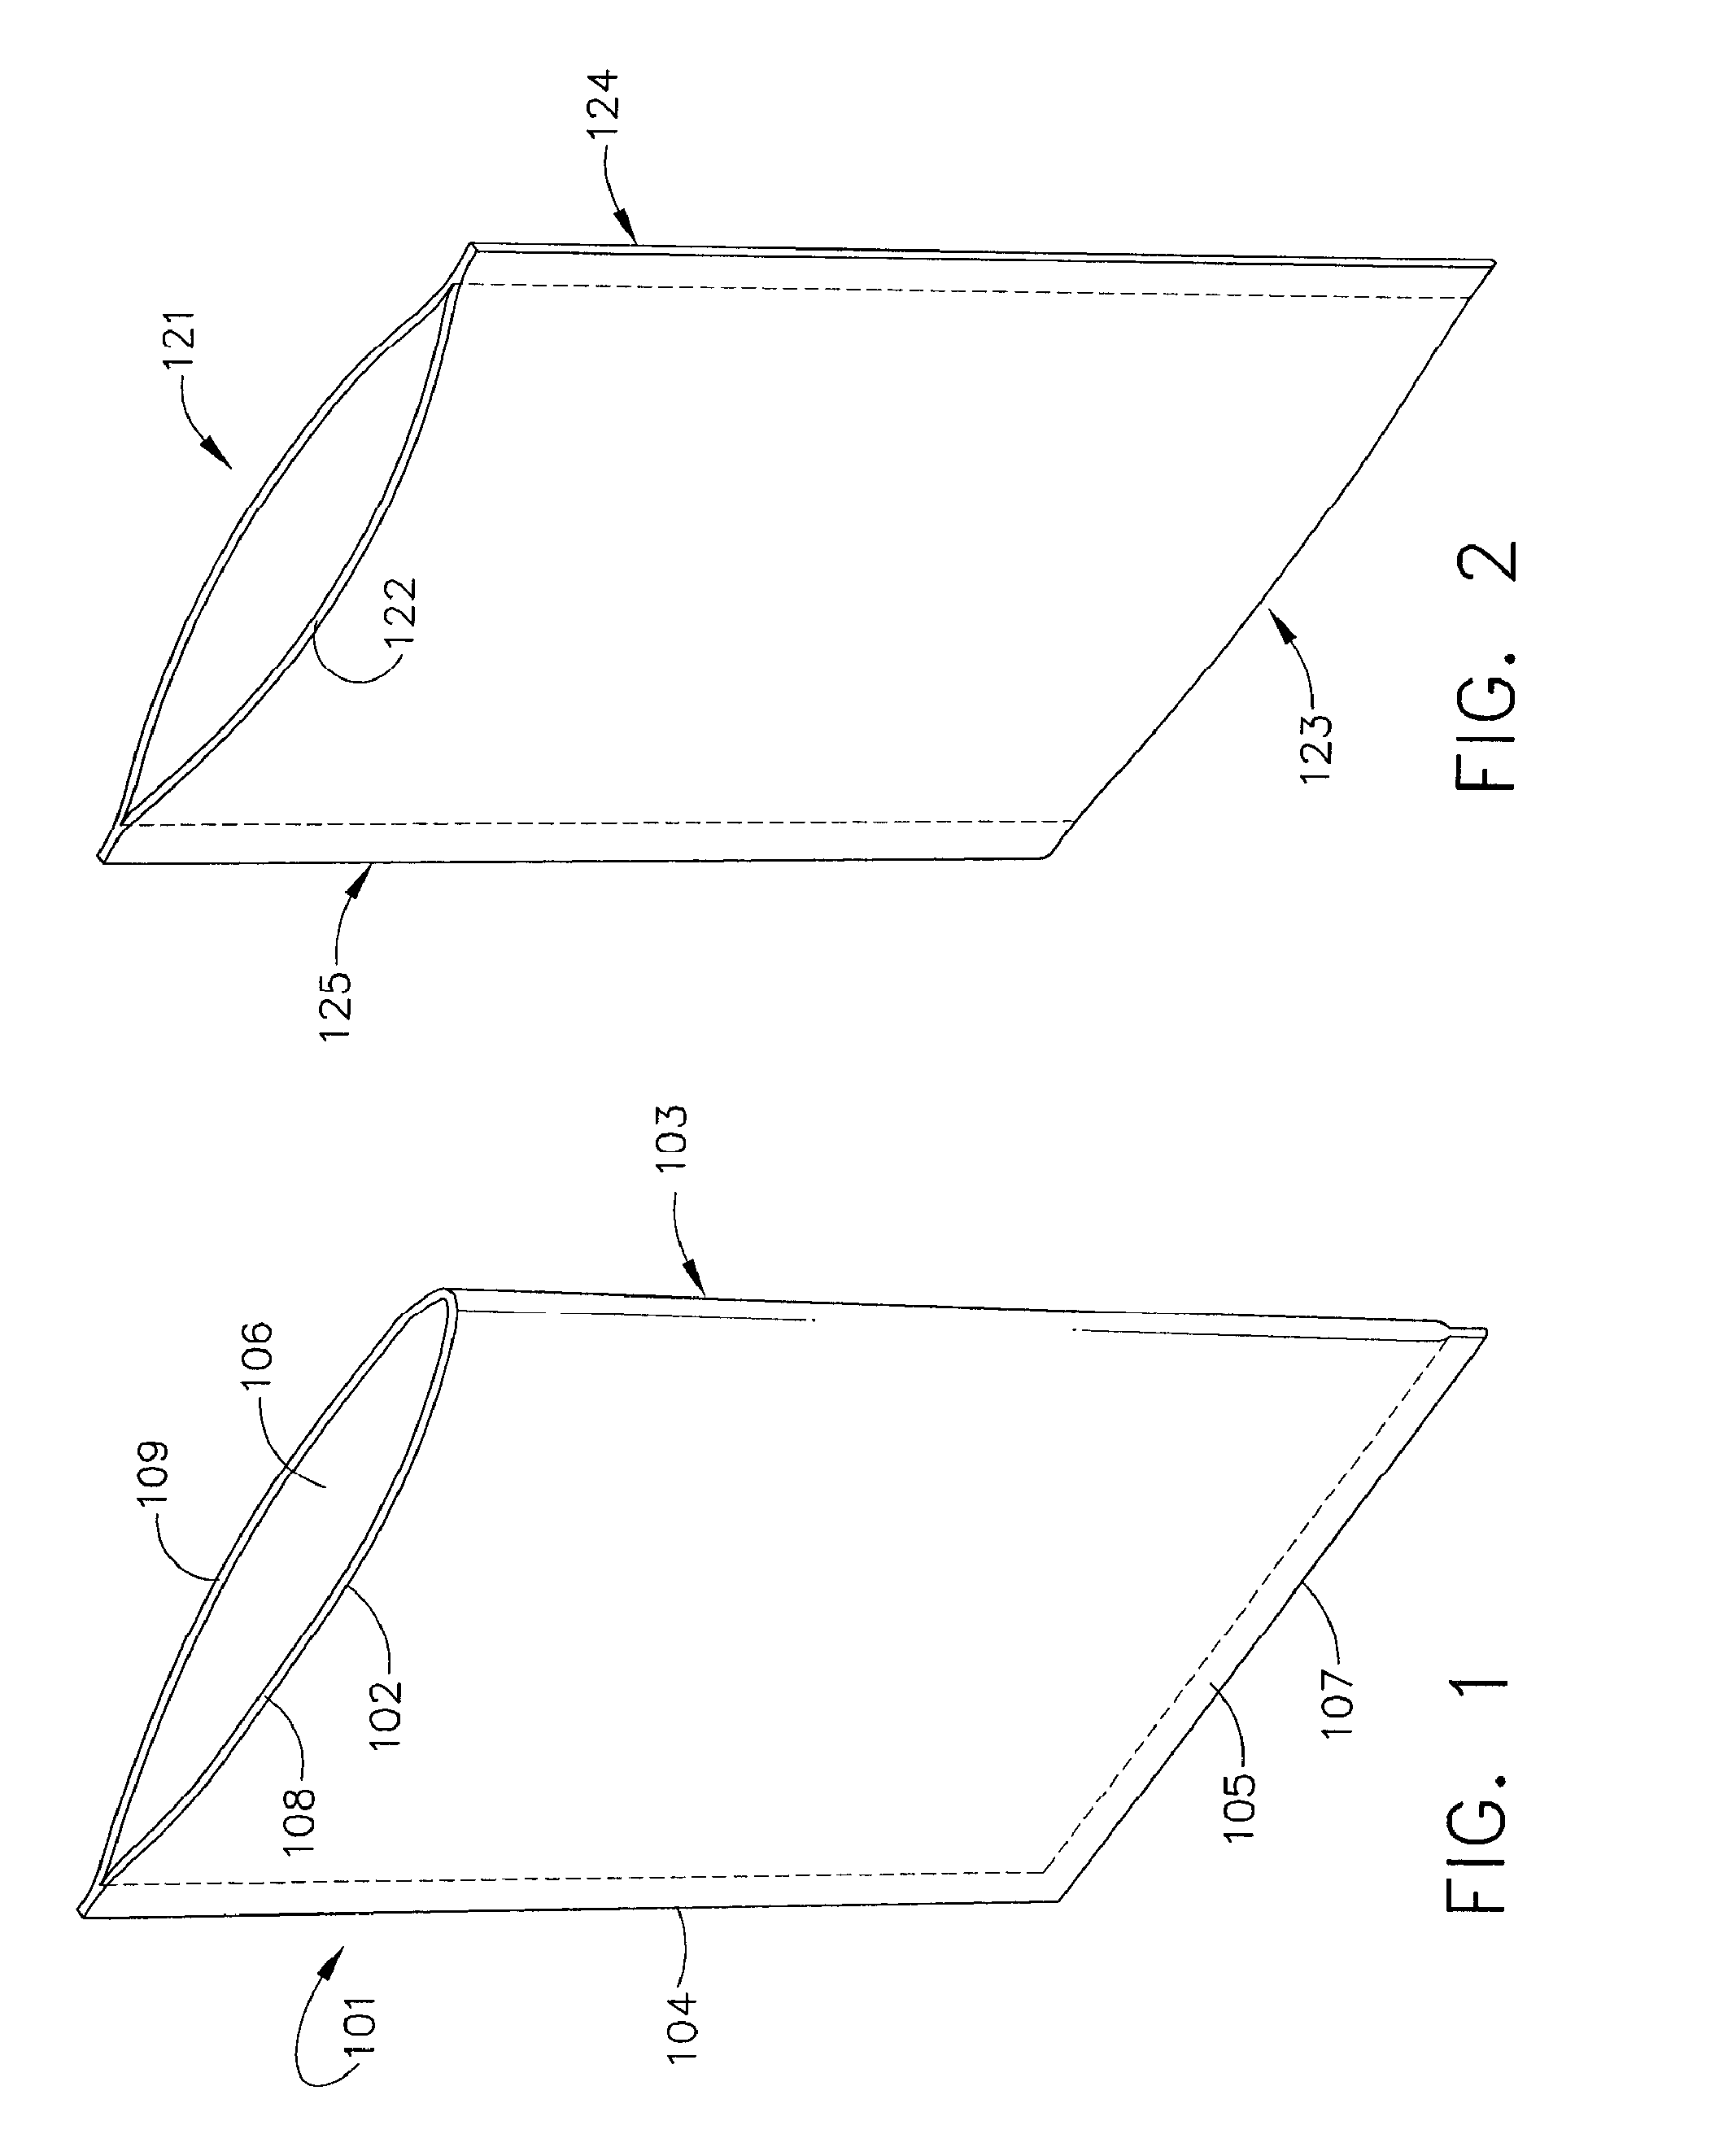 Method of collecting, transporting and cleaning soiled textiles